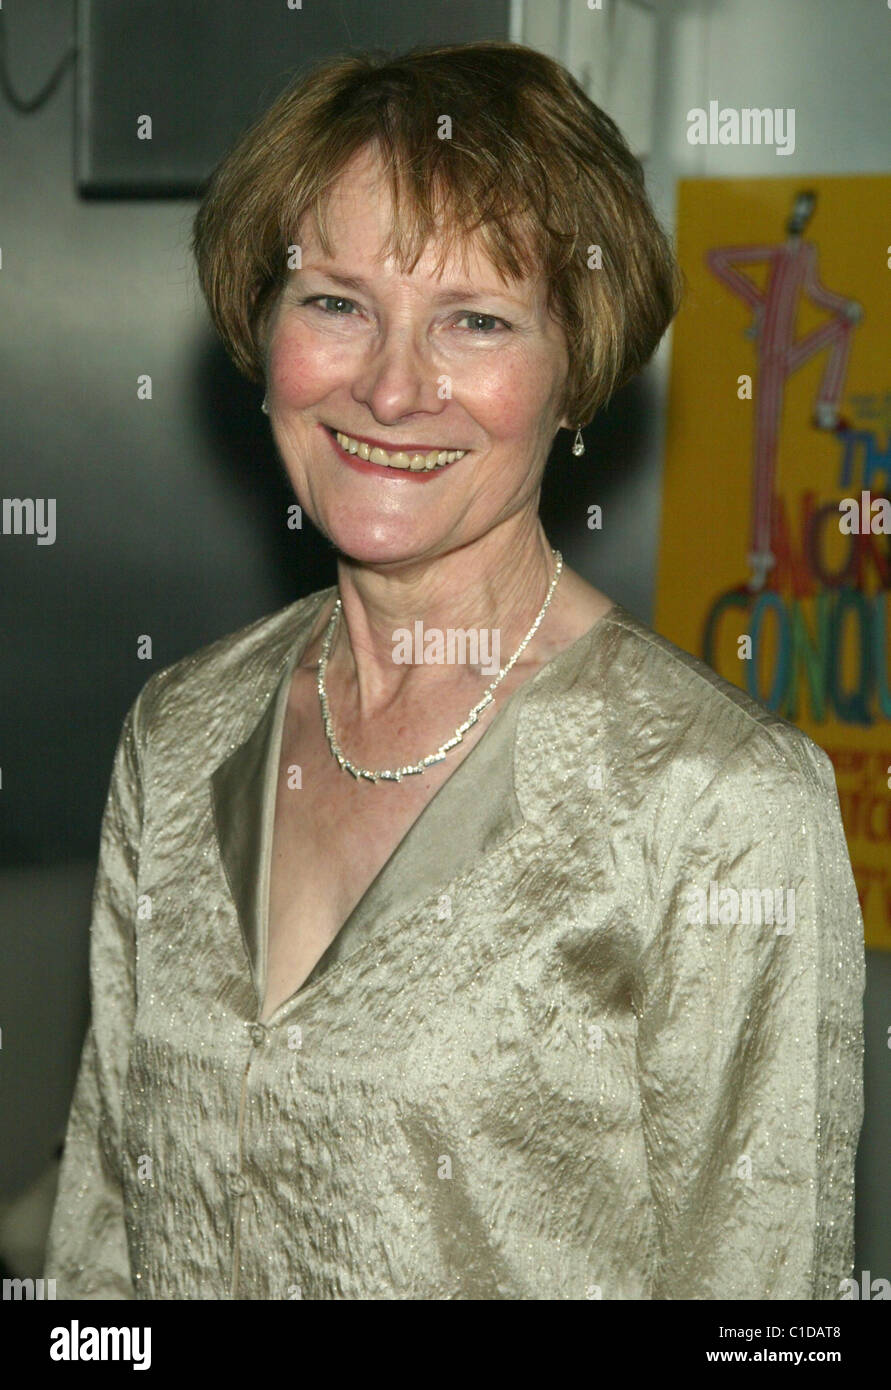 Mrs. Alan Ayckbourn  Opening Night After Party for the Broadway play 'The Norman Conquests' held at Arena.  New York City, USA Stock Photo